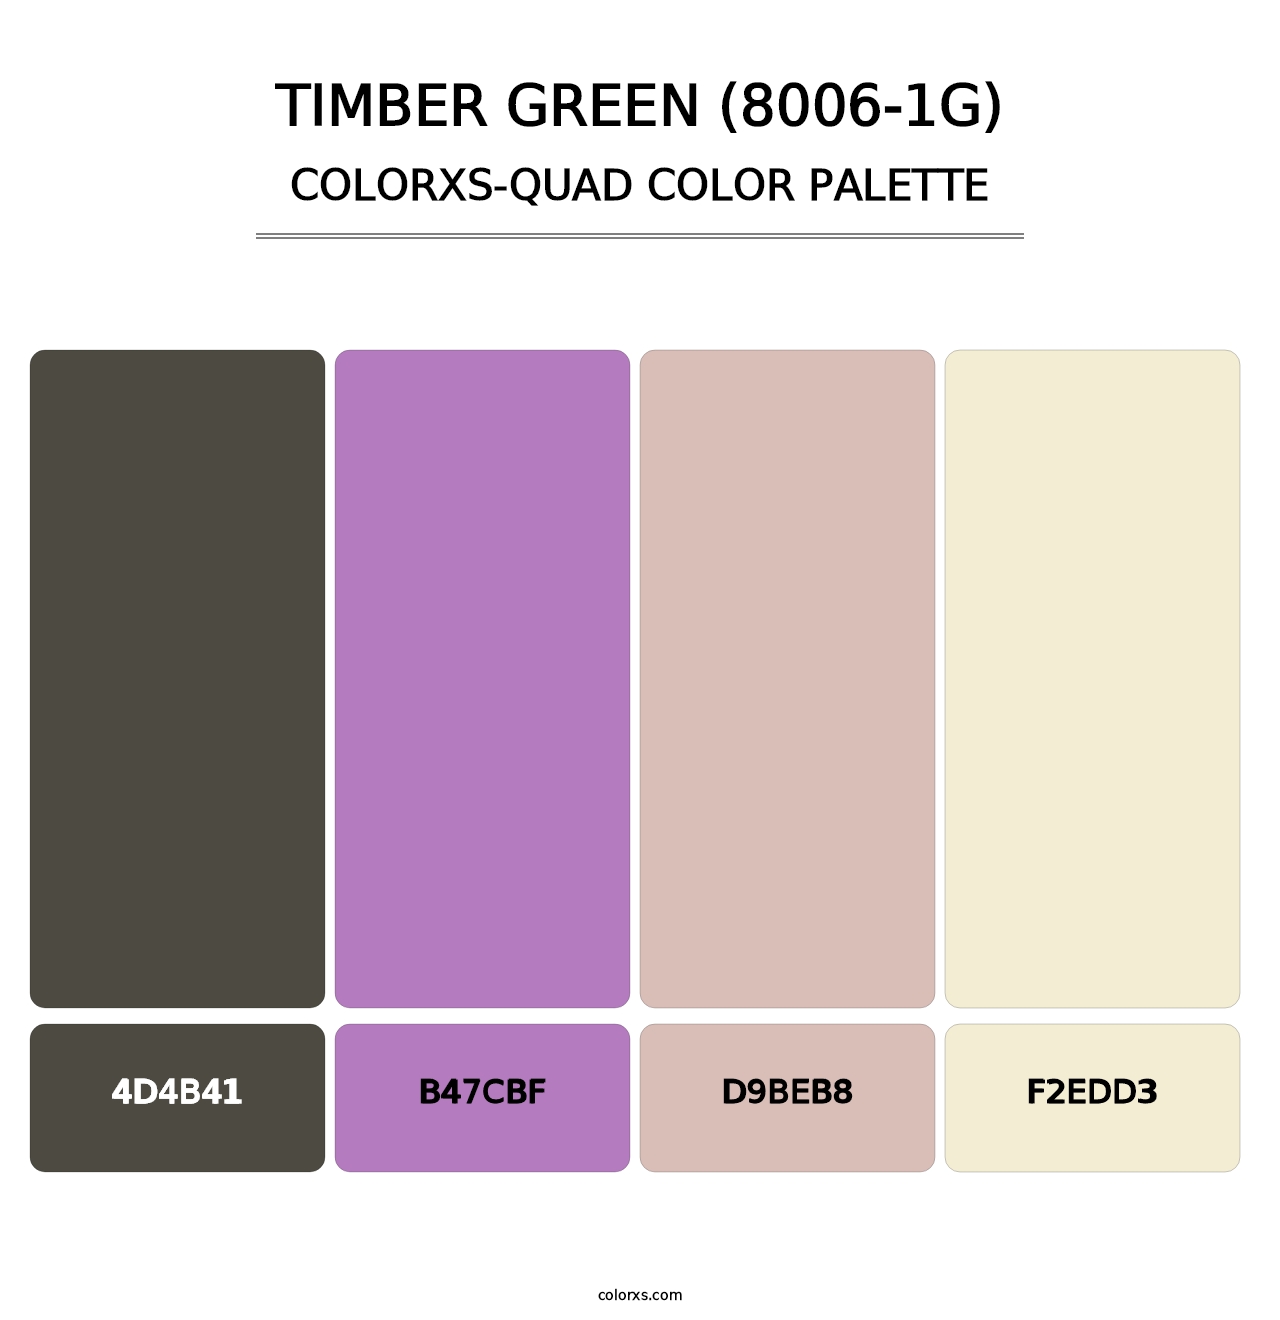 Timber Green (8006-1G) - Colorxs Quad Palette